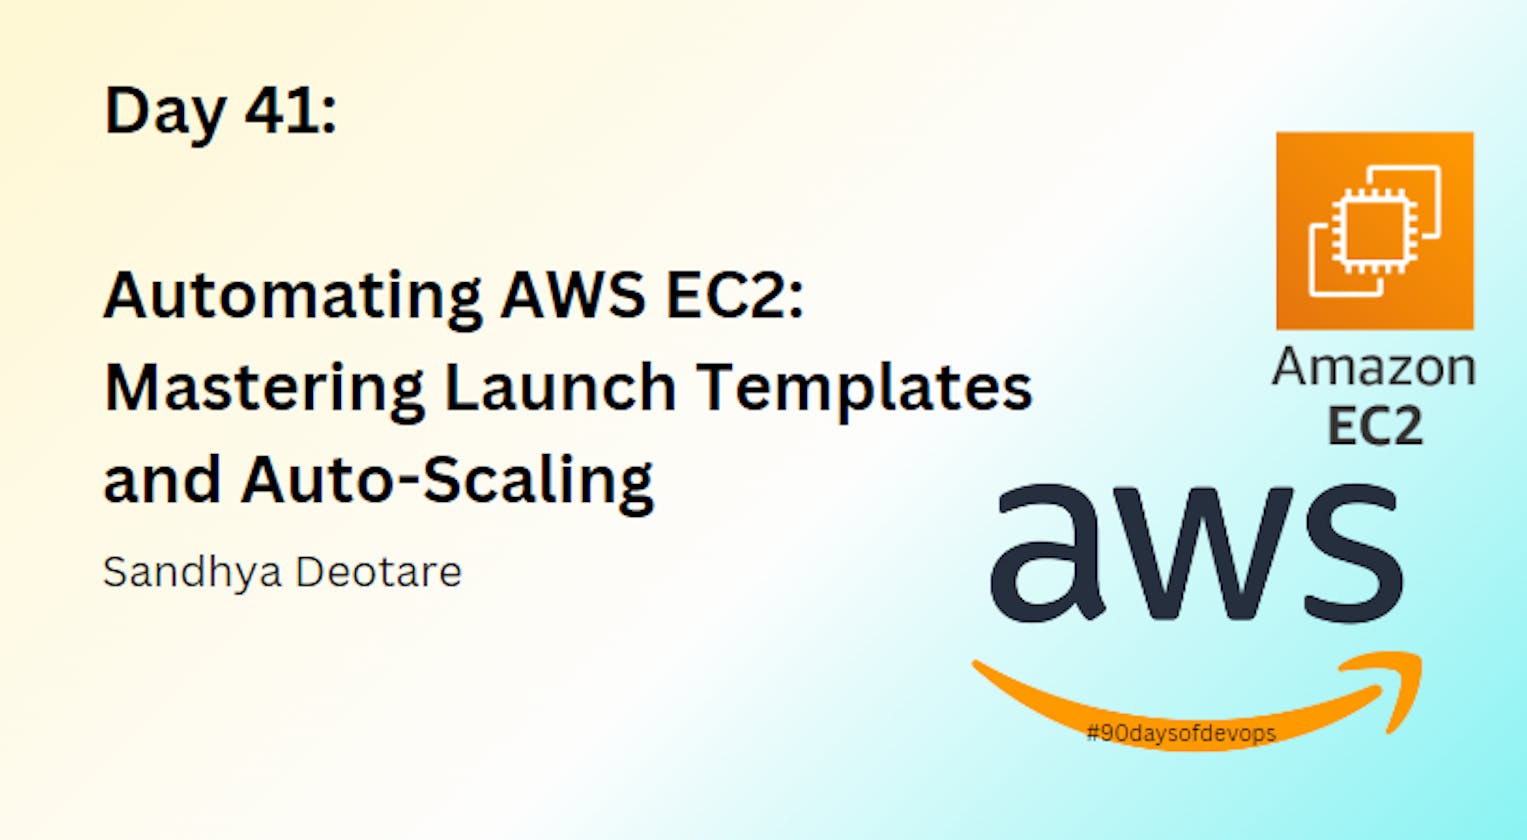 Automating AWS EC2: Mastering Launch Templates and Auto-Scaling